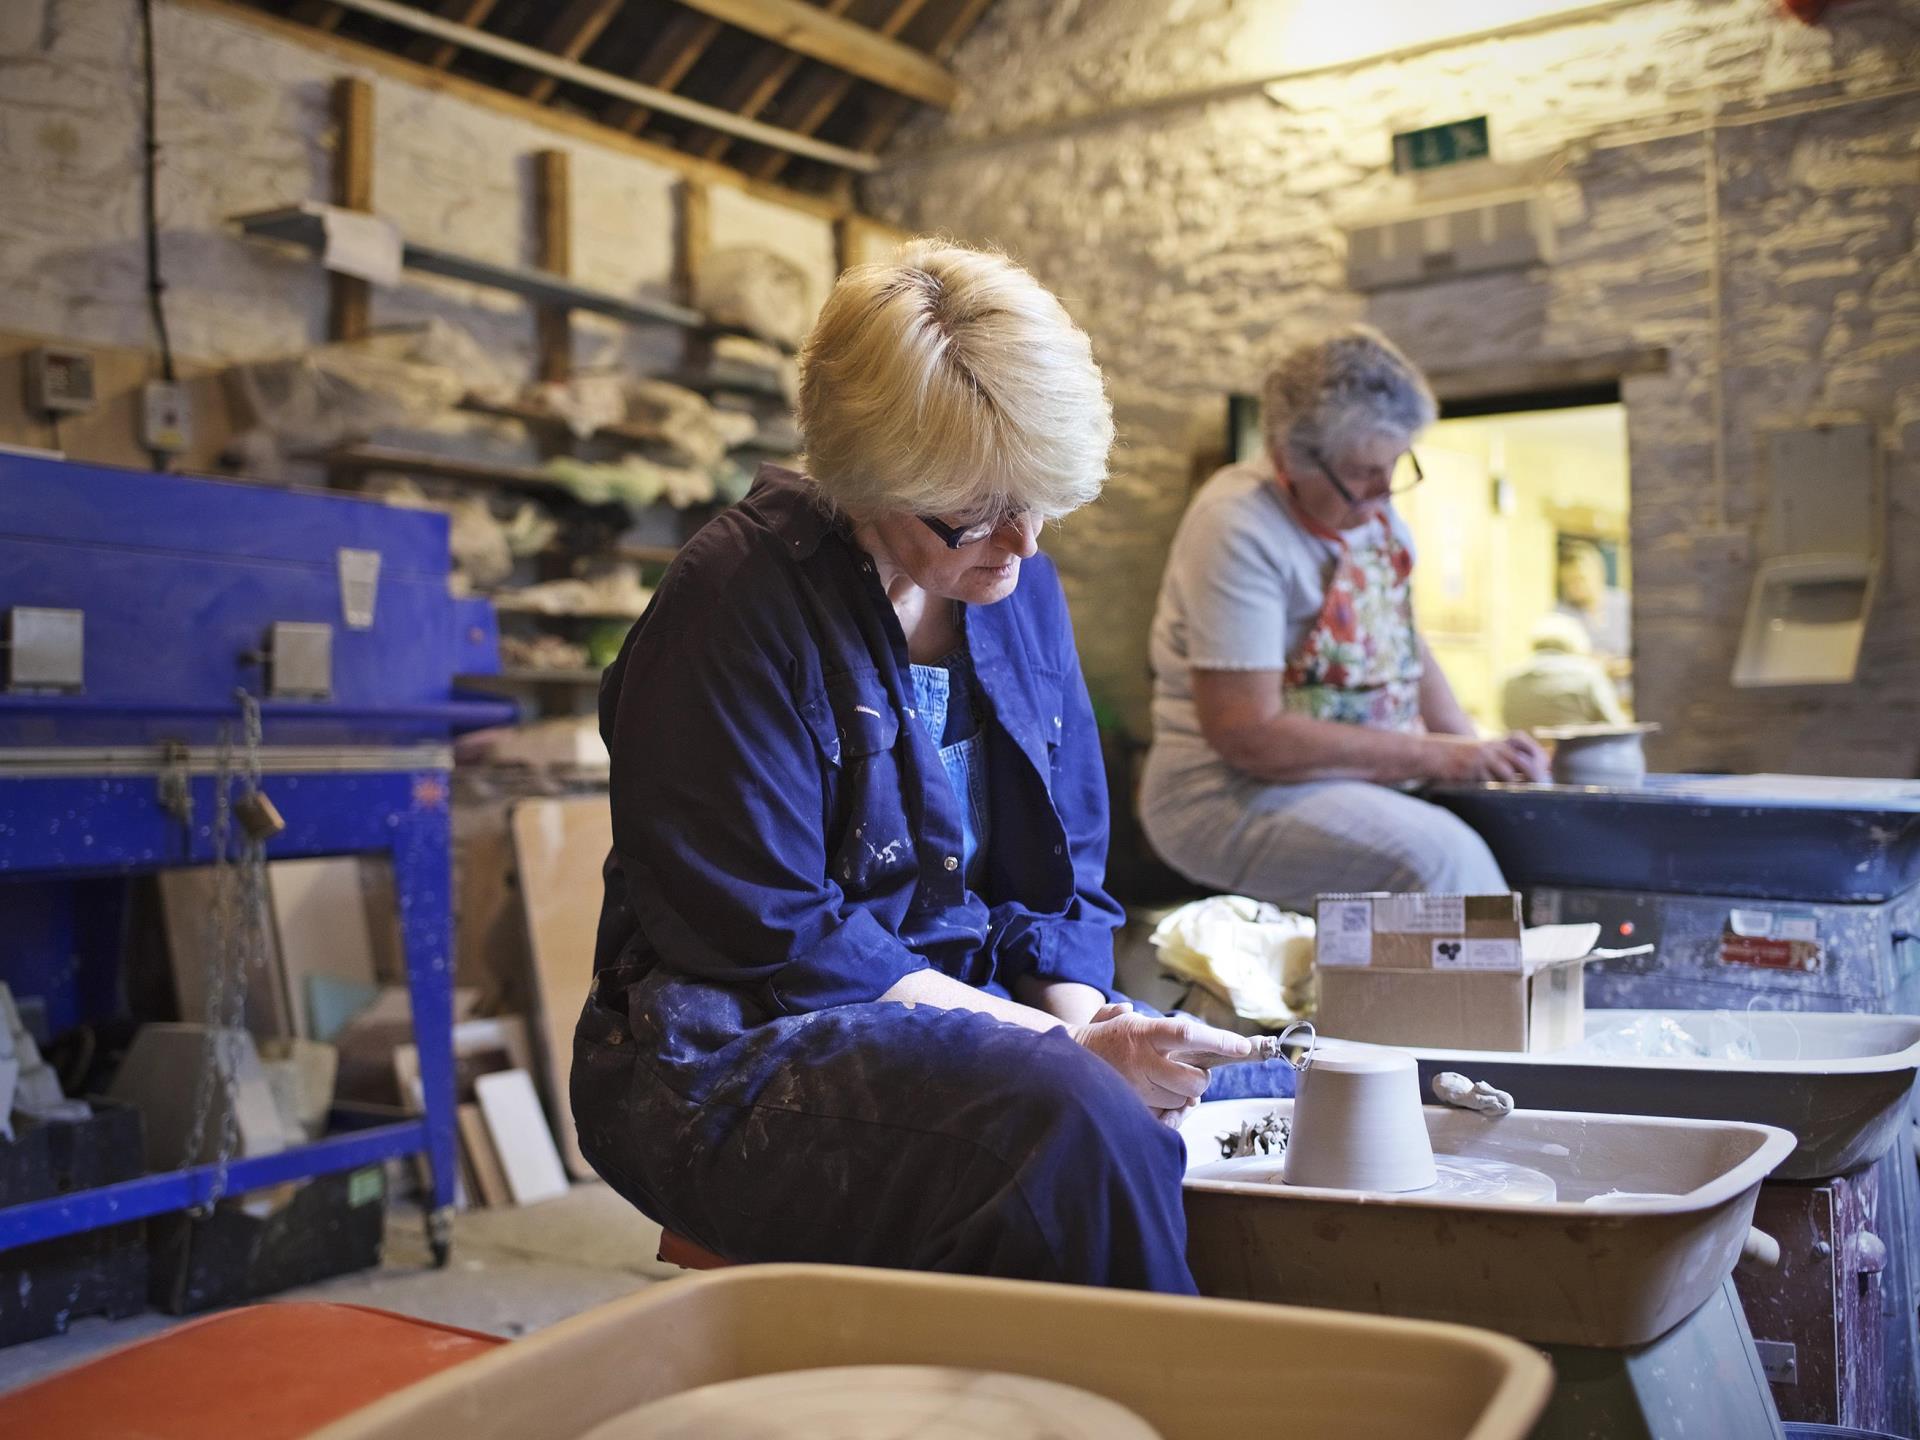 Pottery classes on site